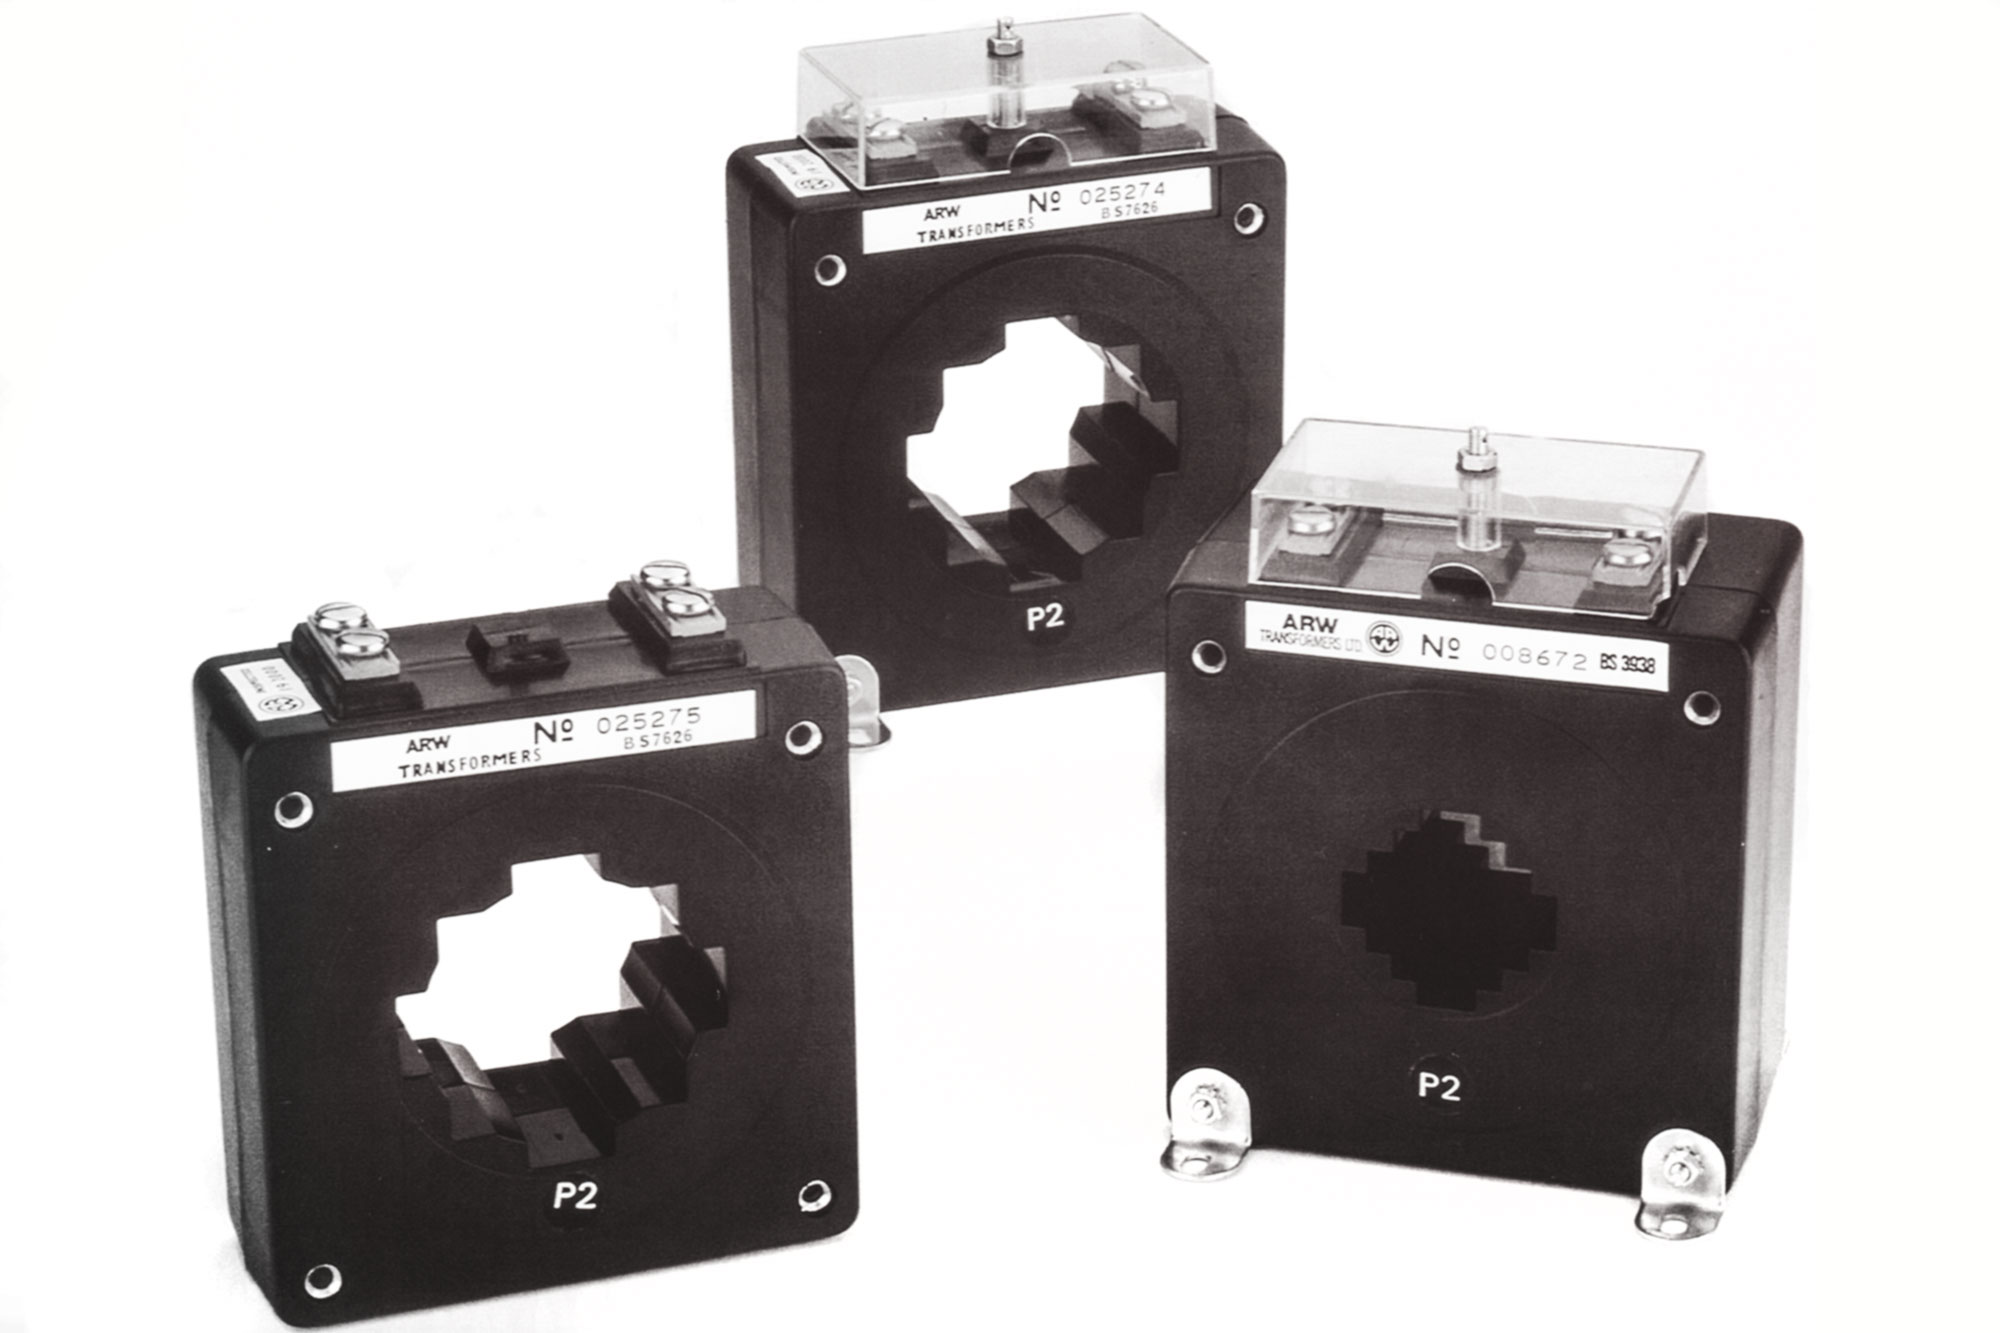 Moulded-Case Utility Transformers with Flame Retardant Casing